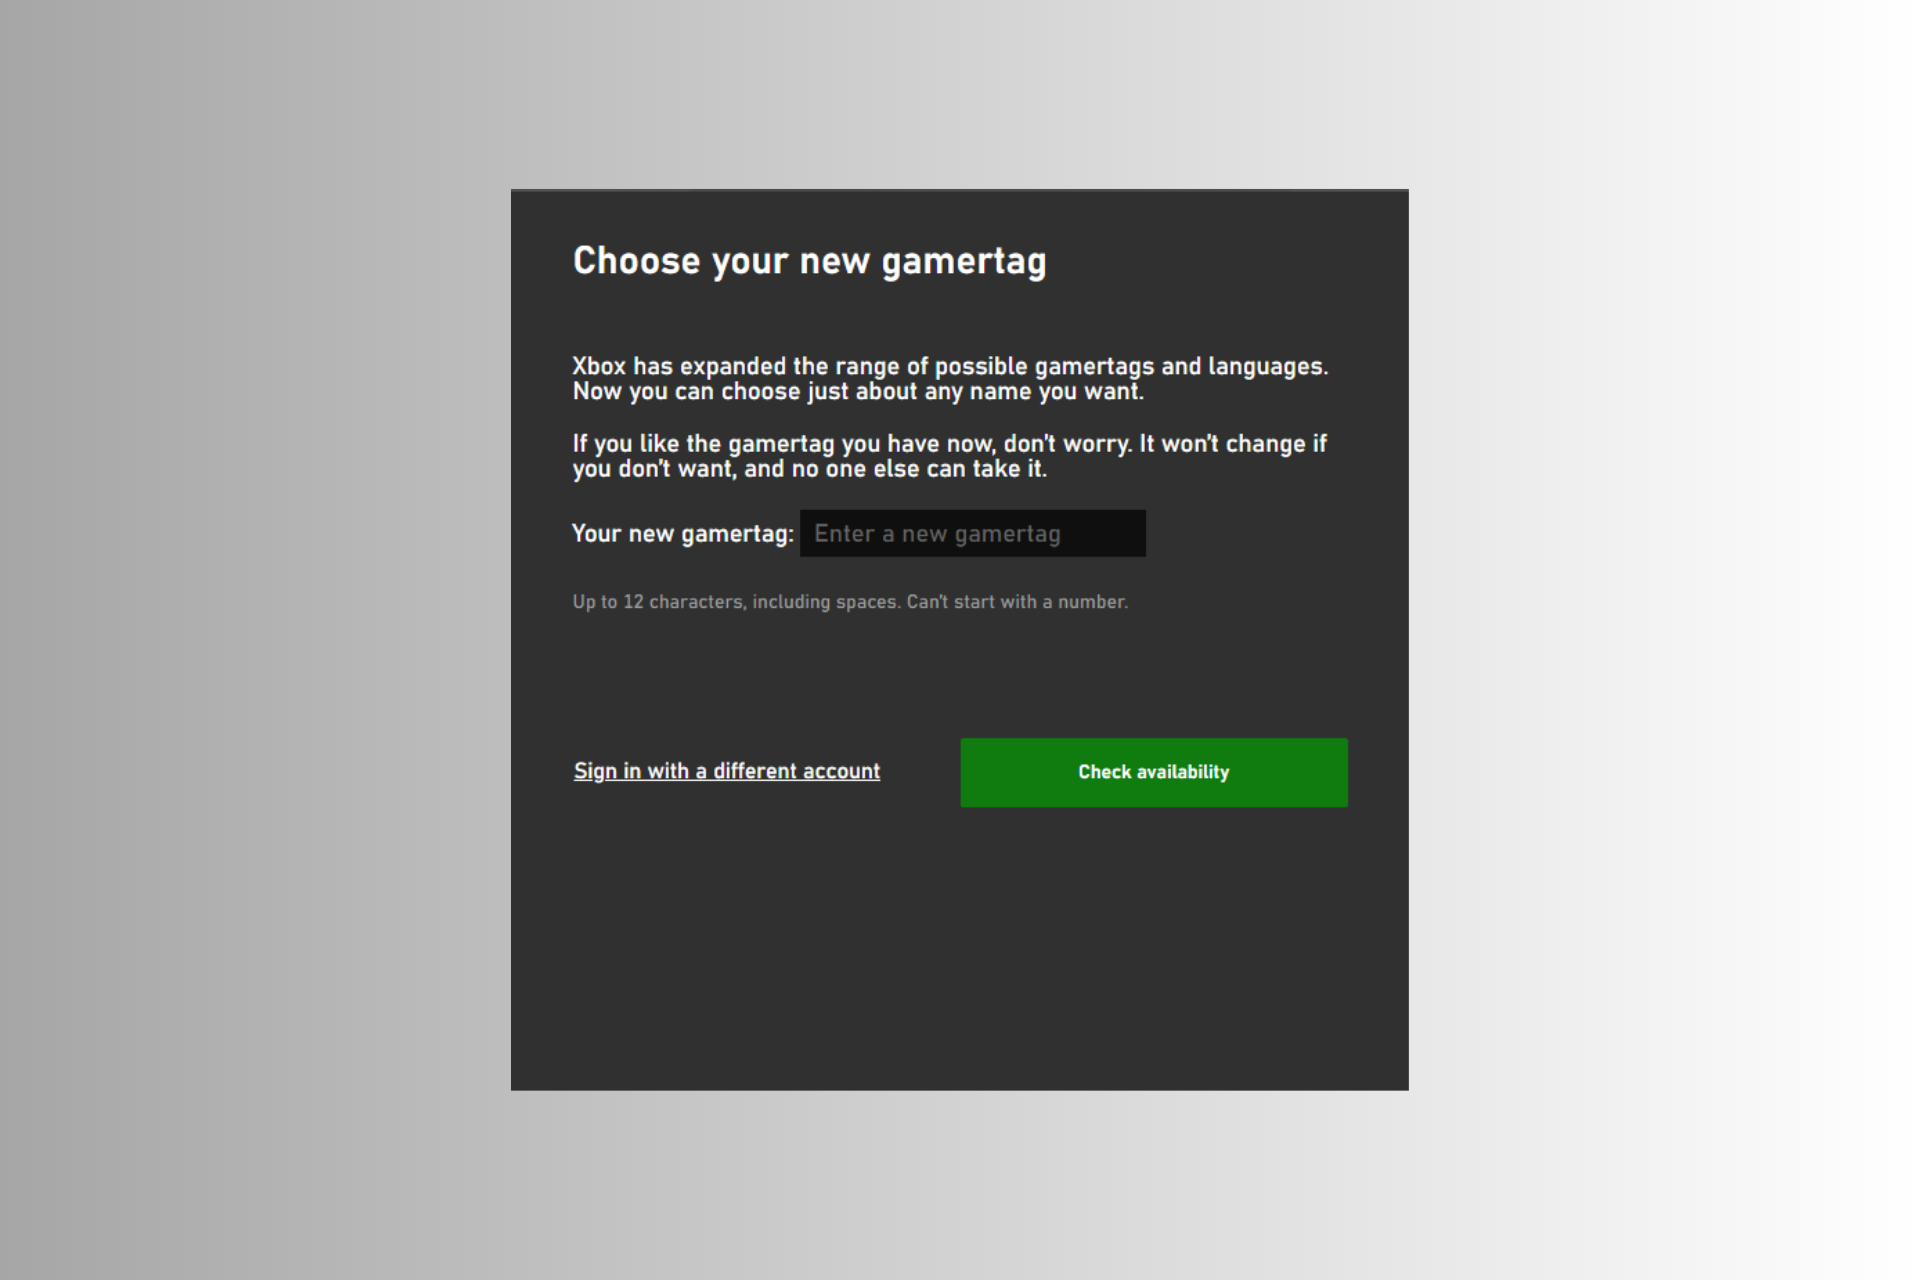 Xbox Live ID numbers let you choose a Gamertag that's already taken